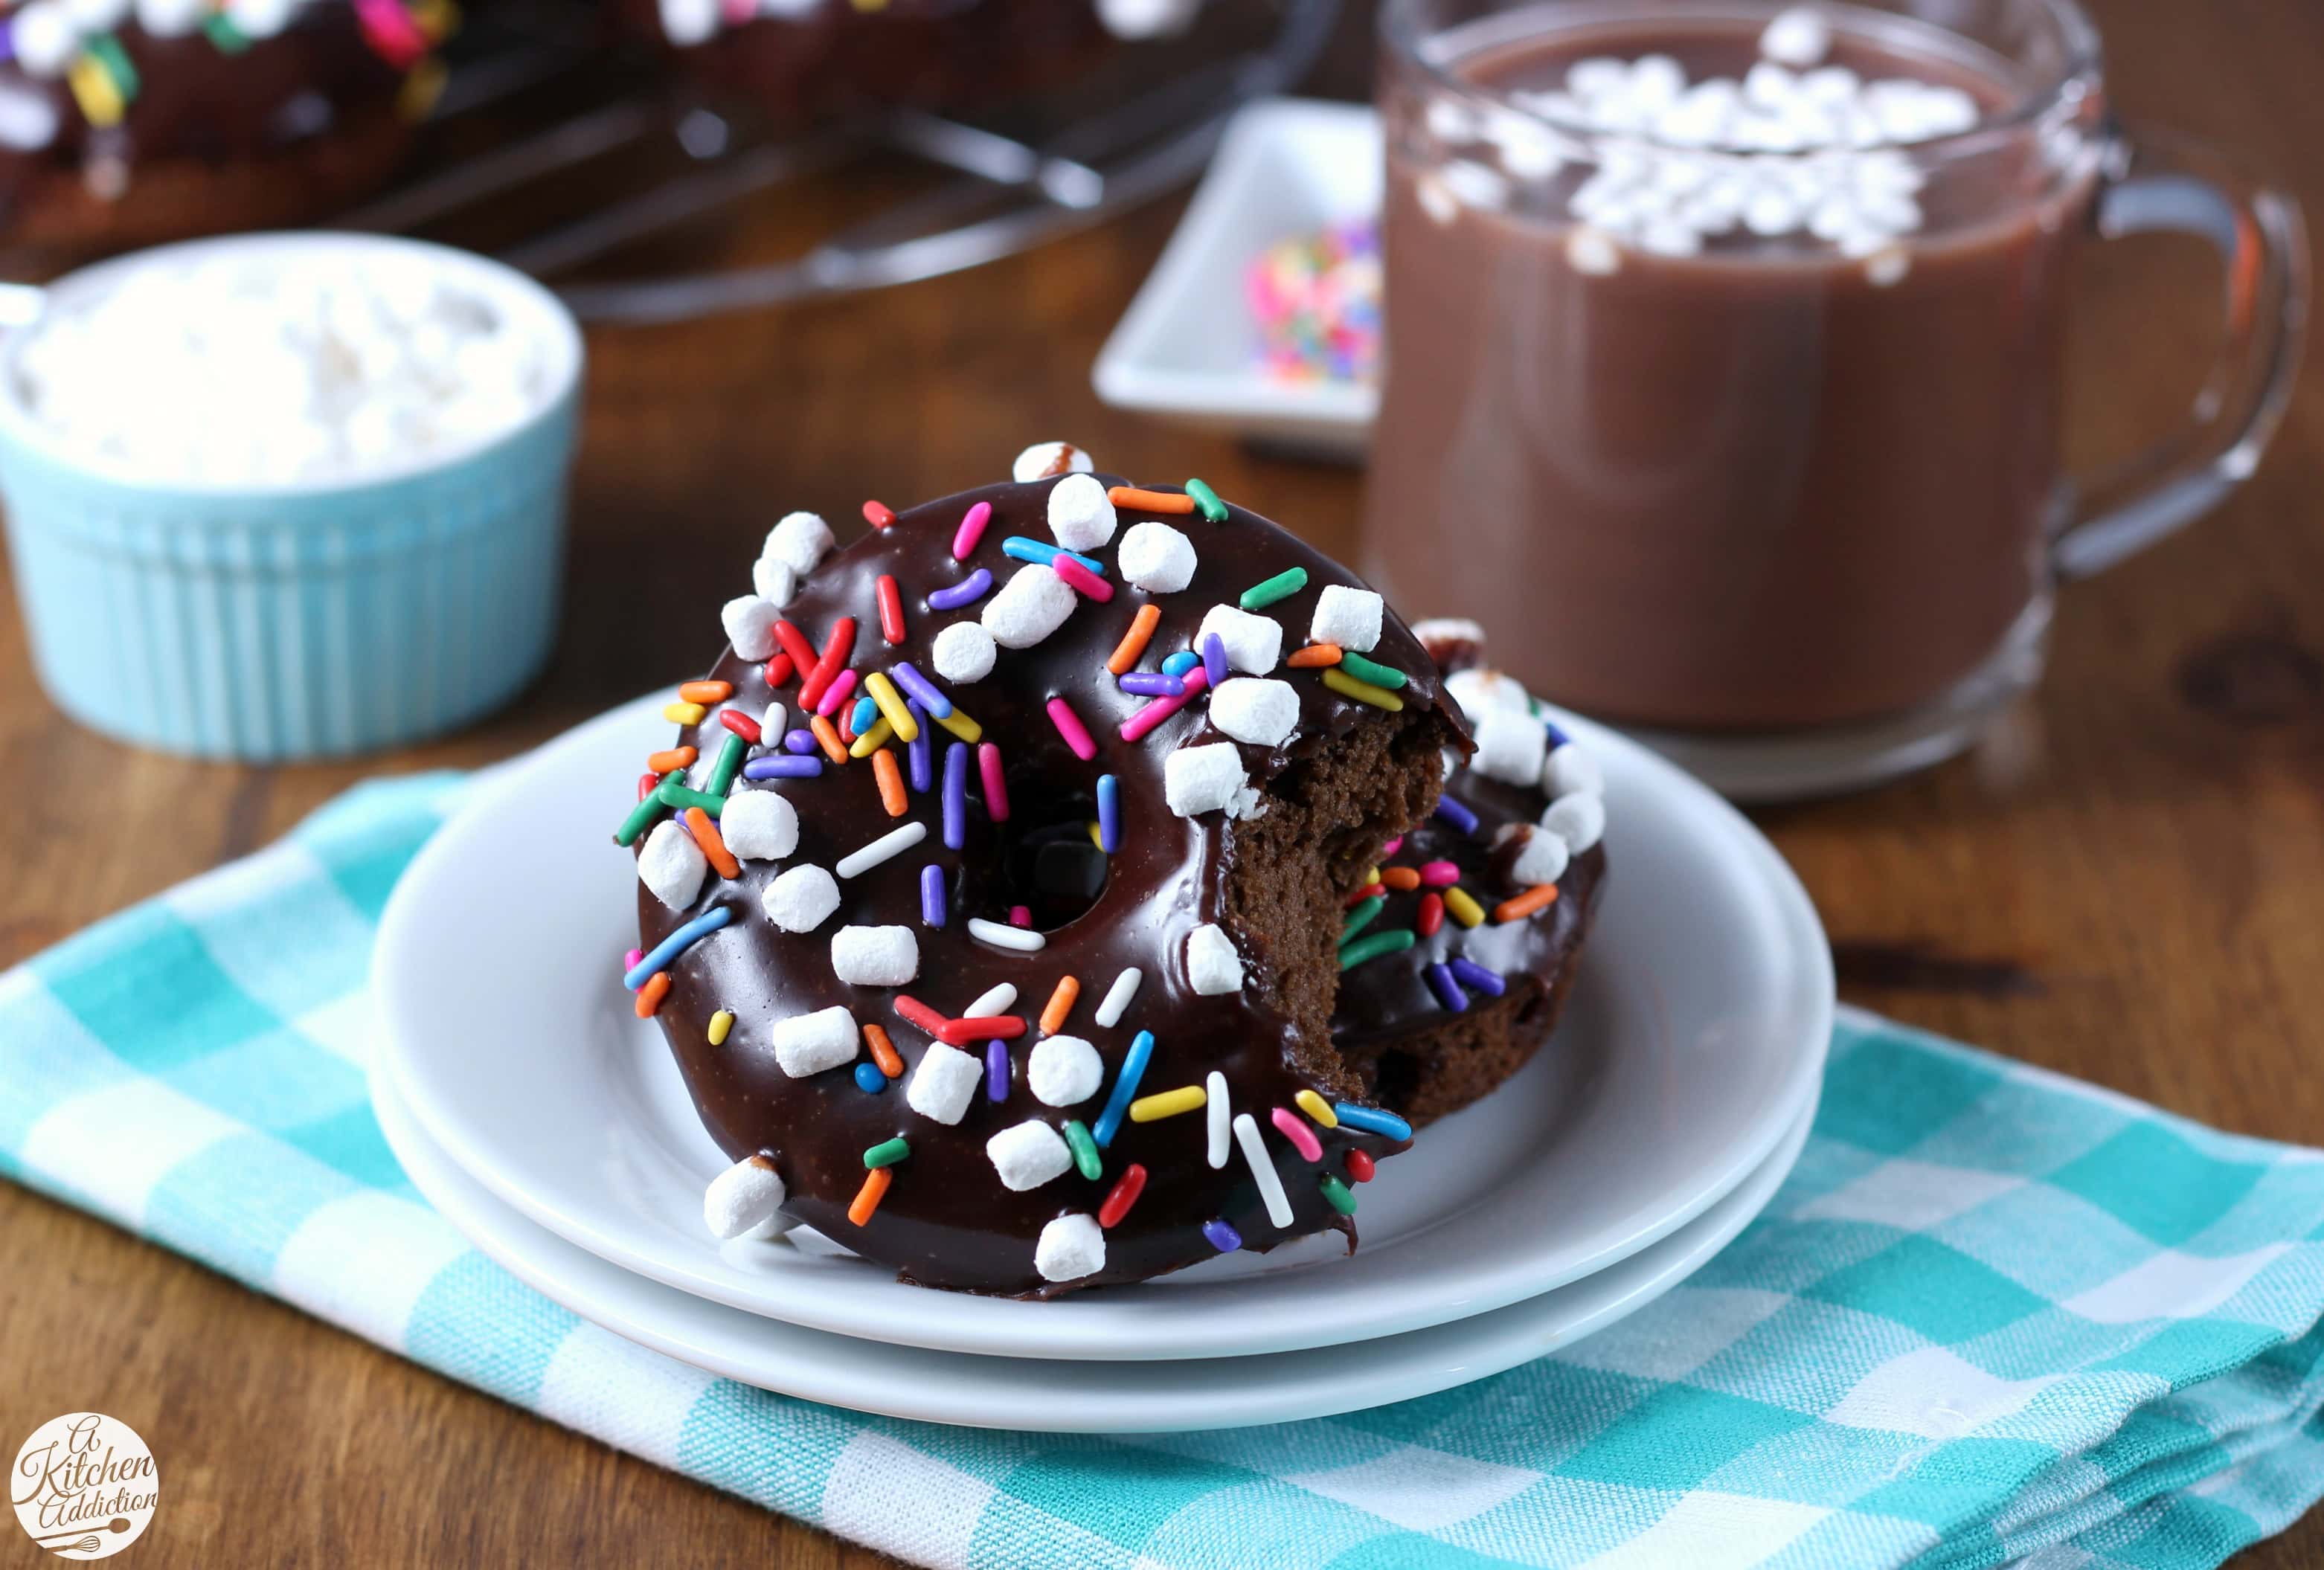 Hot Chocolate Donuts Recipe with Chocolate Ganache from A Kitchen Addiction